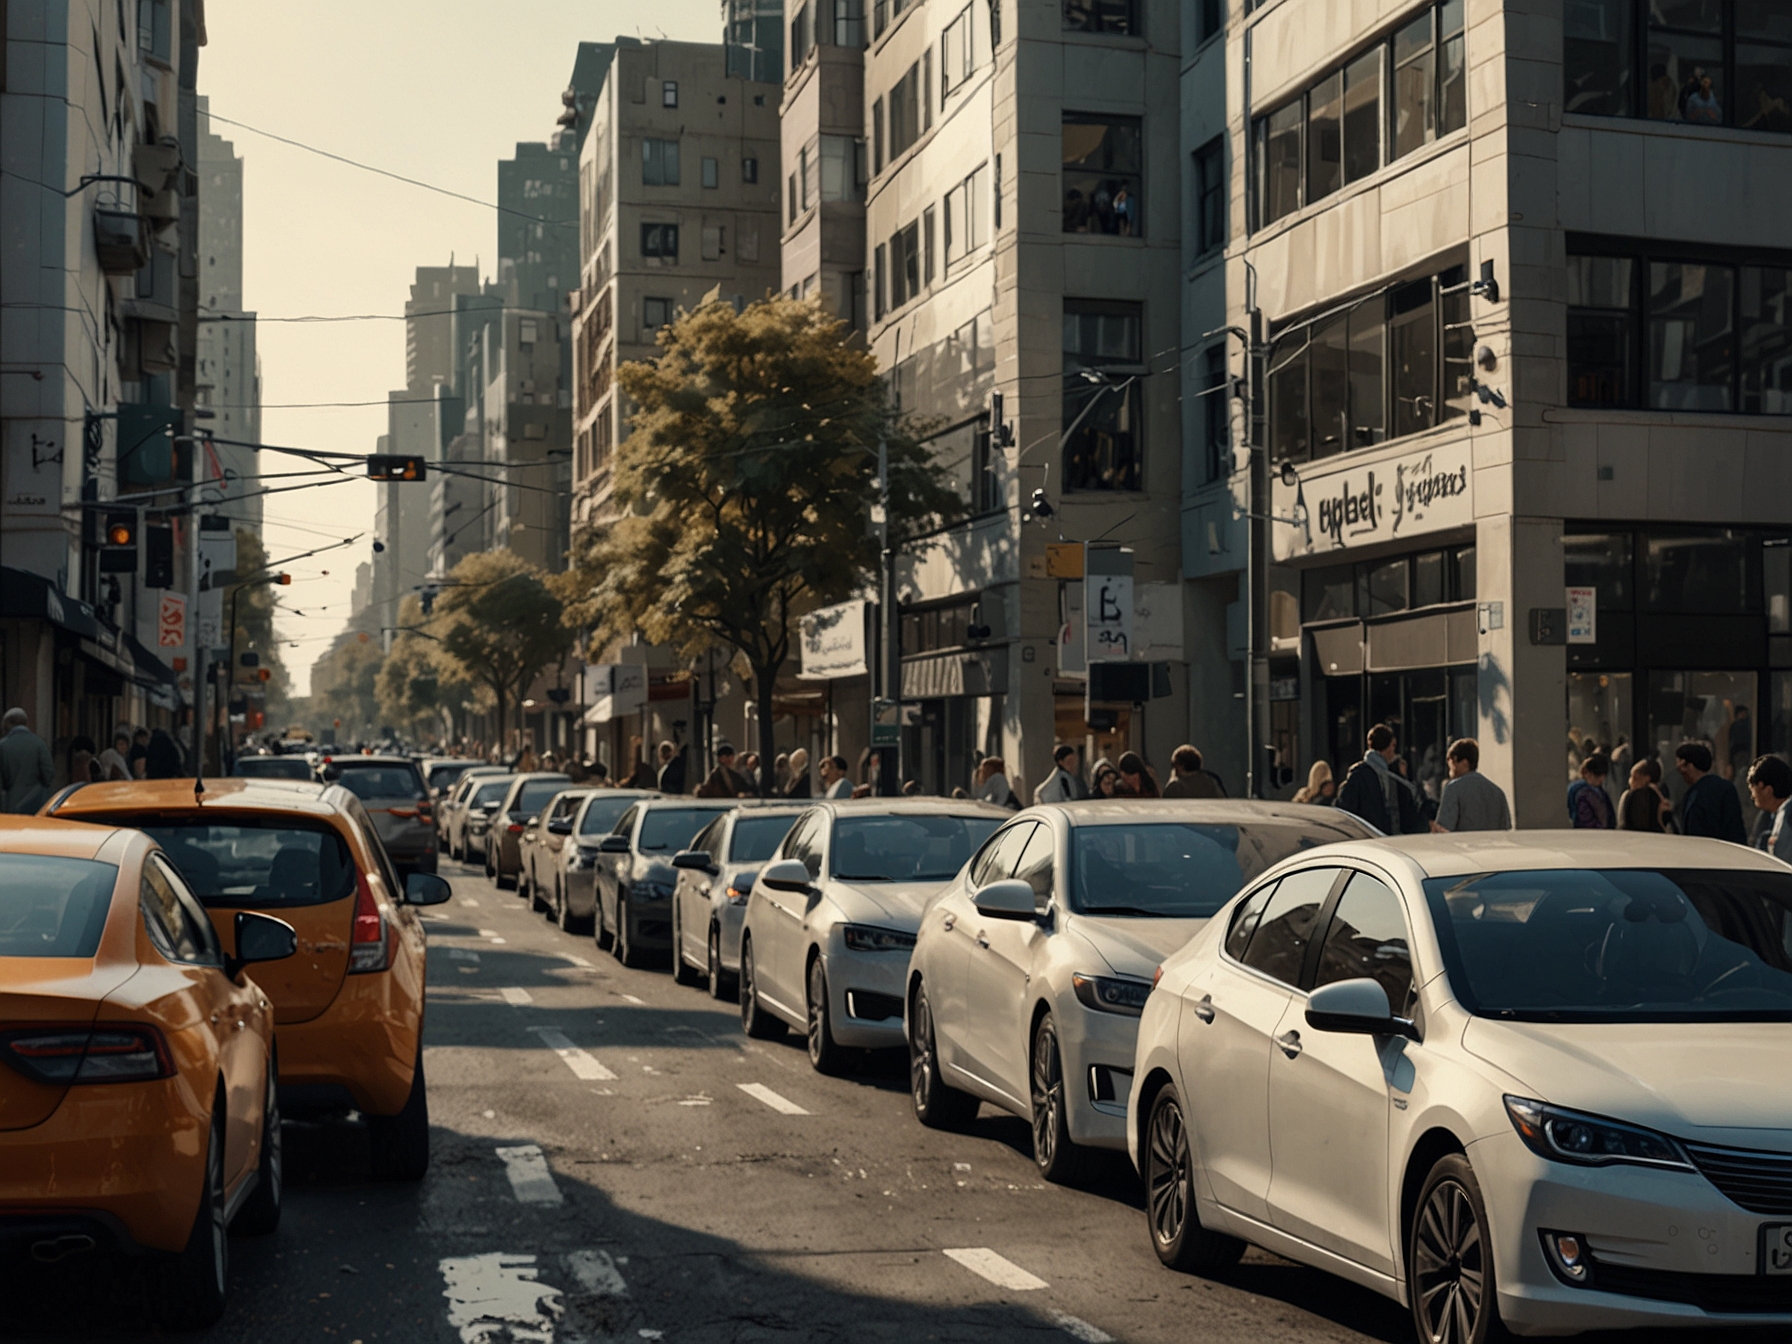 A busy city road with a mix of electric and traditional vehicles, highlighting the mainstream success of EVs and their increasing adoption in urban areas.